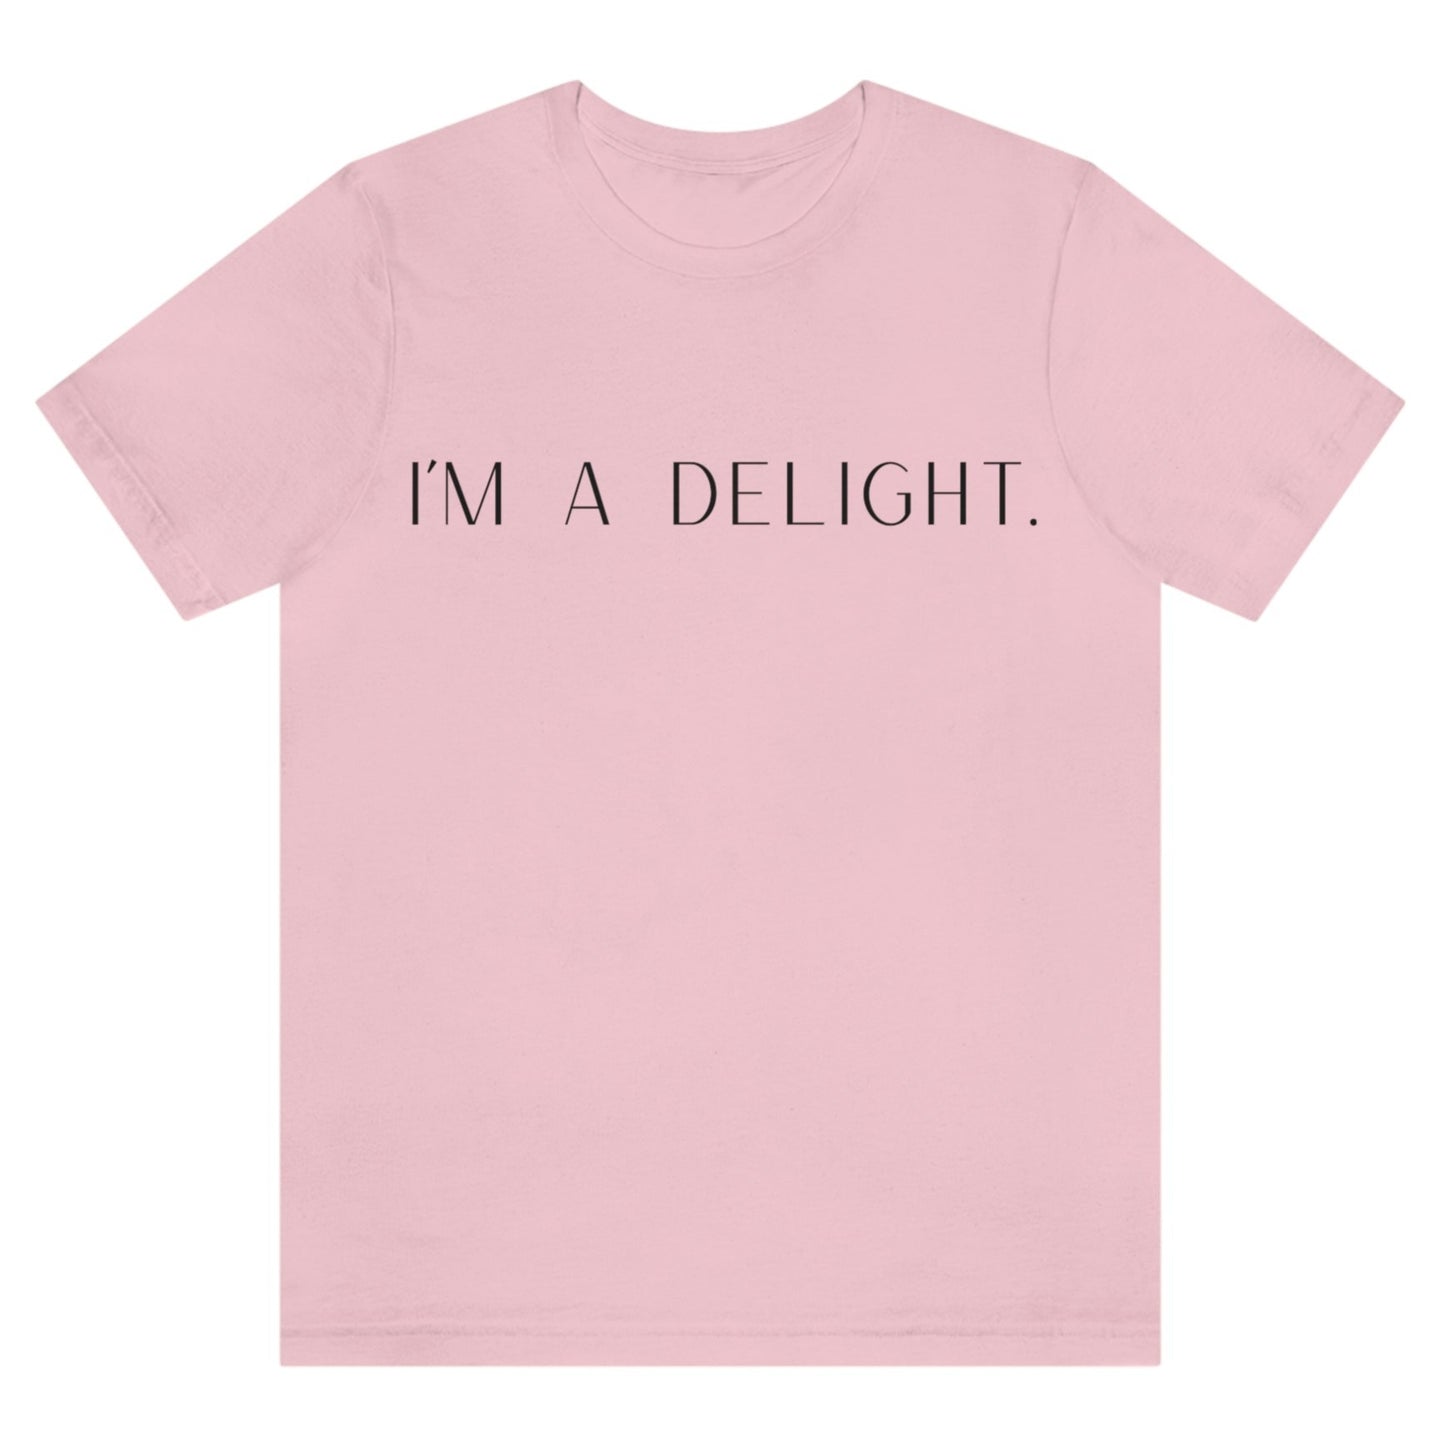 im-a-delight-pink-t-shirt-womens-funny-sarcastic